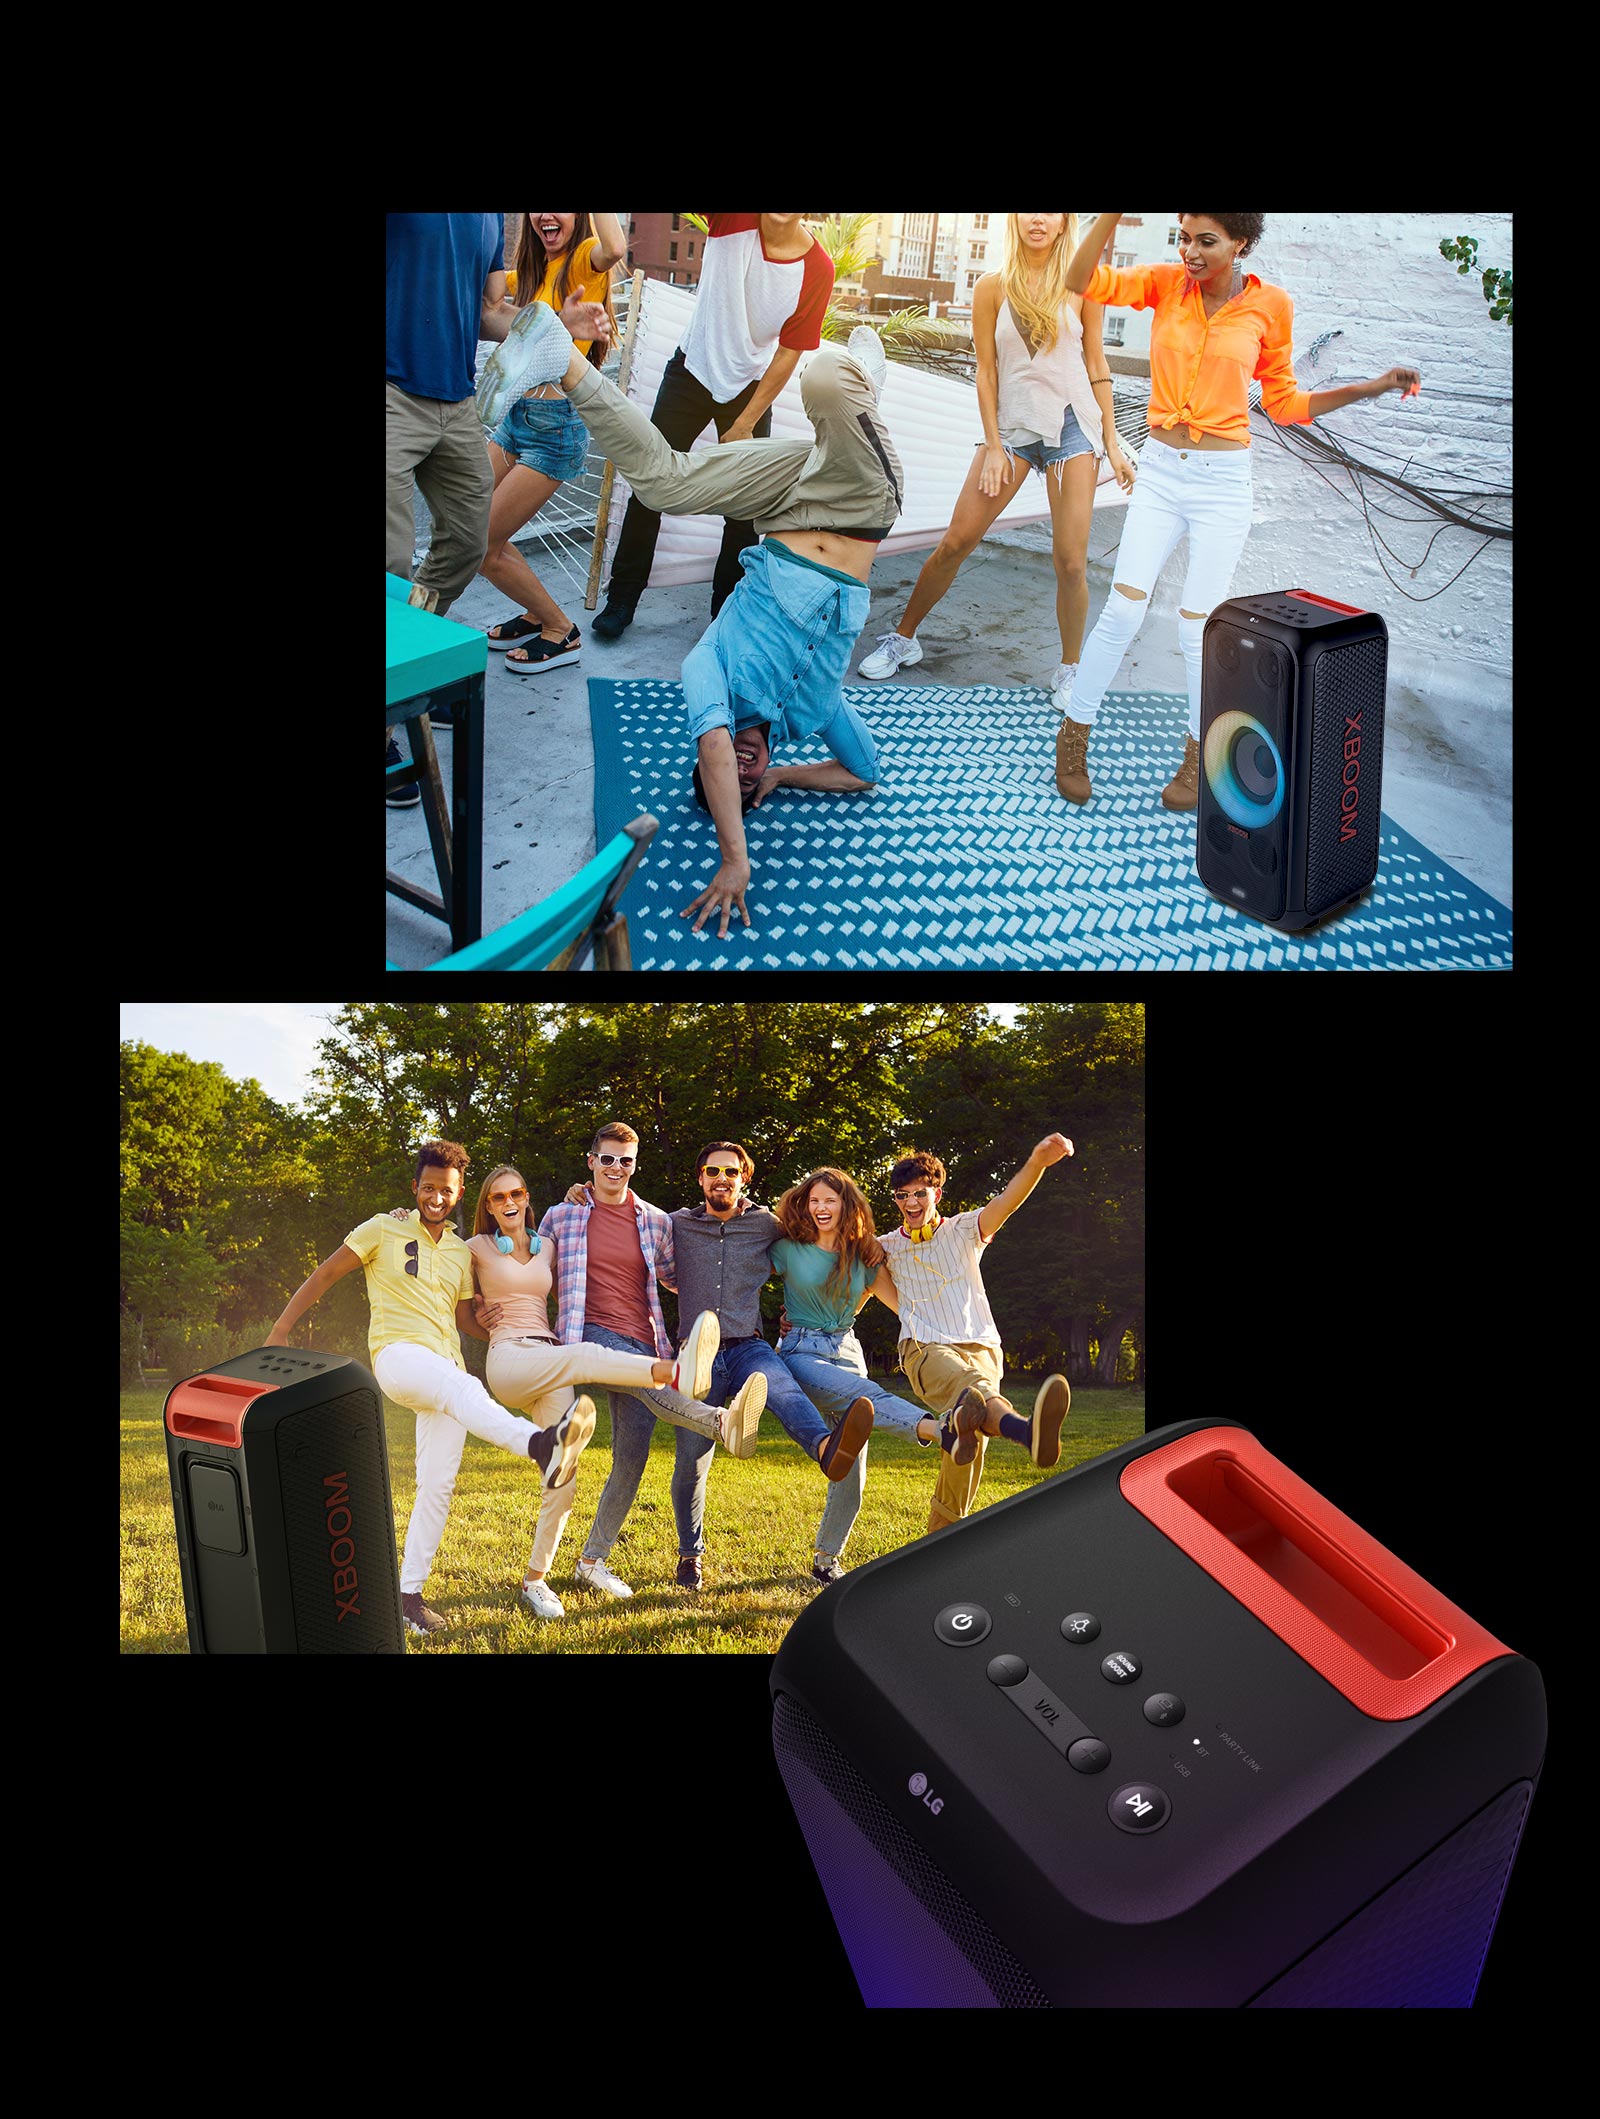 LG XBOOM Portable Party Bluetooth Speaker With Multi-Colour Ring Lighting |  LG East Africa